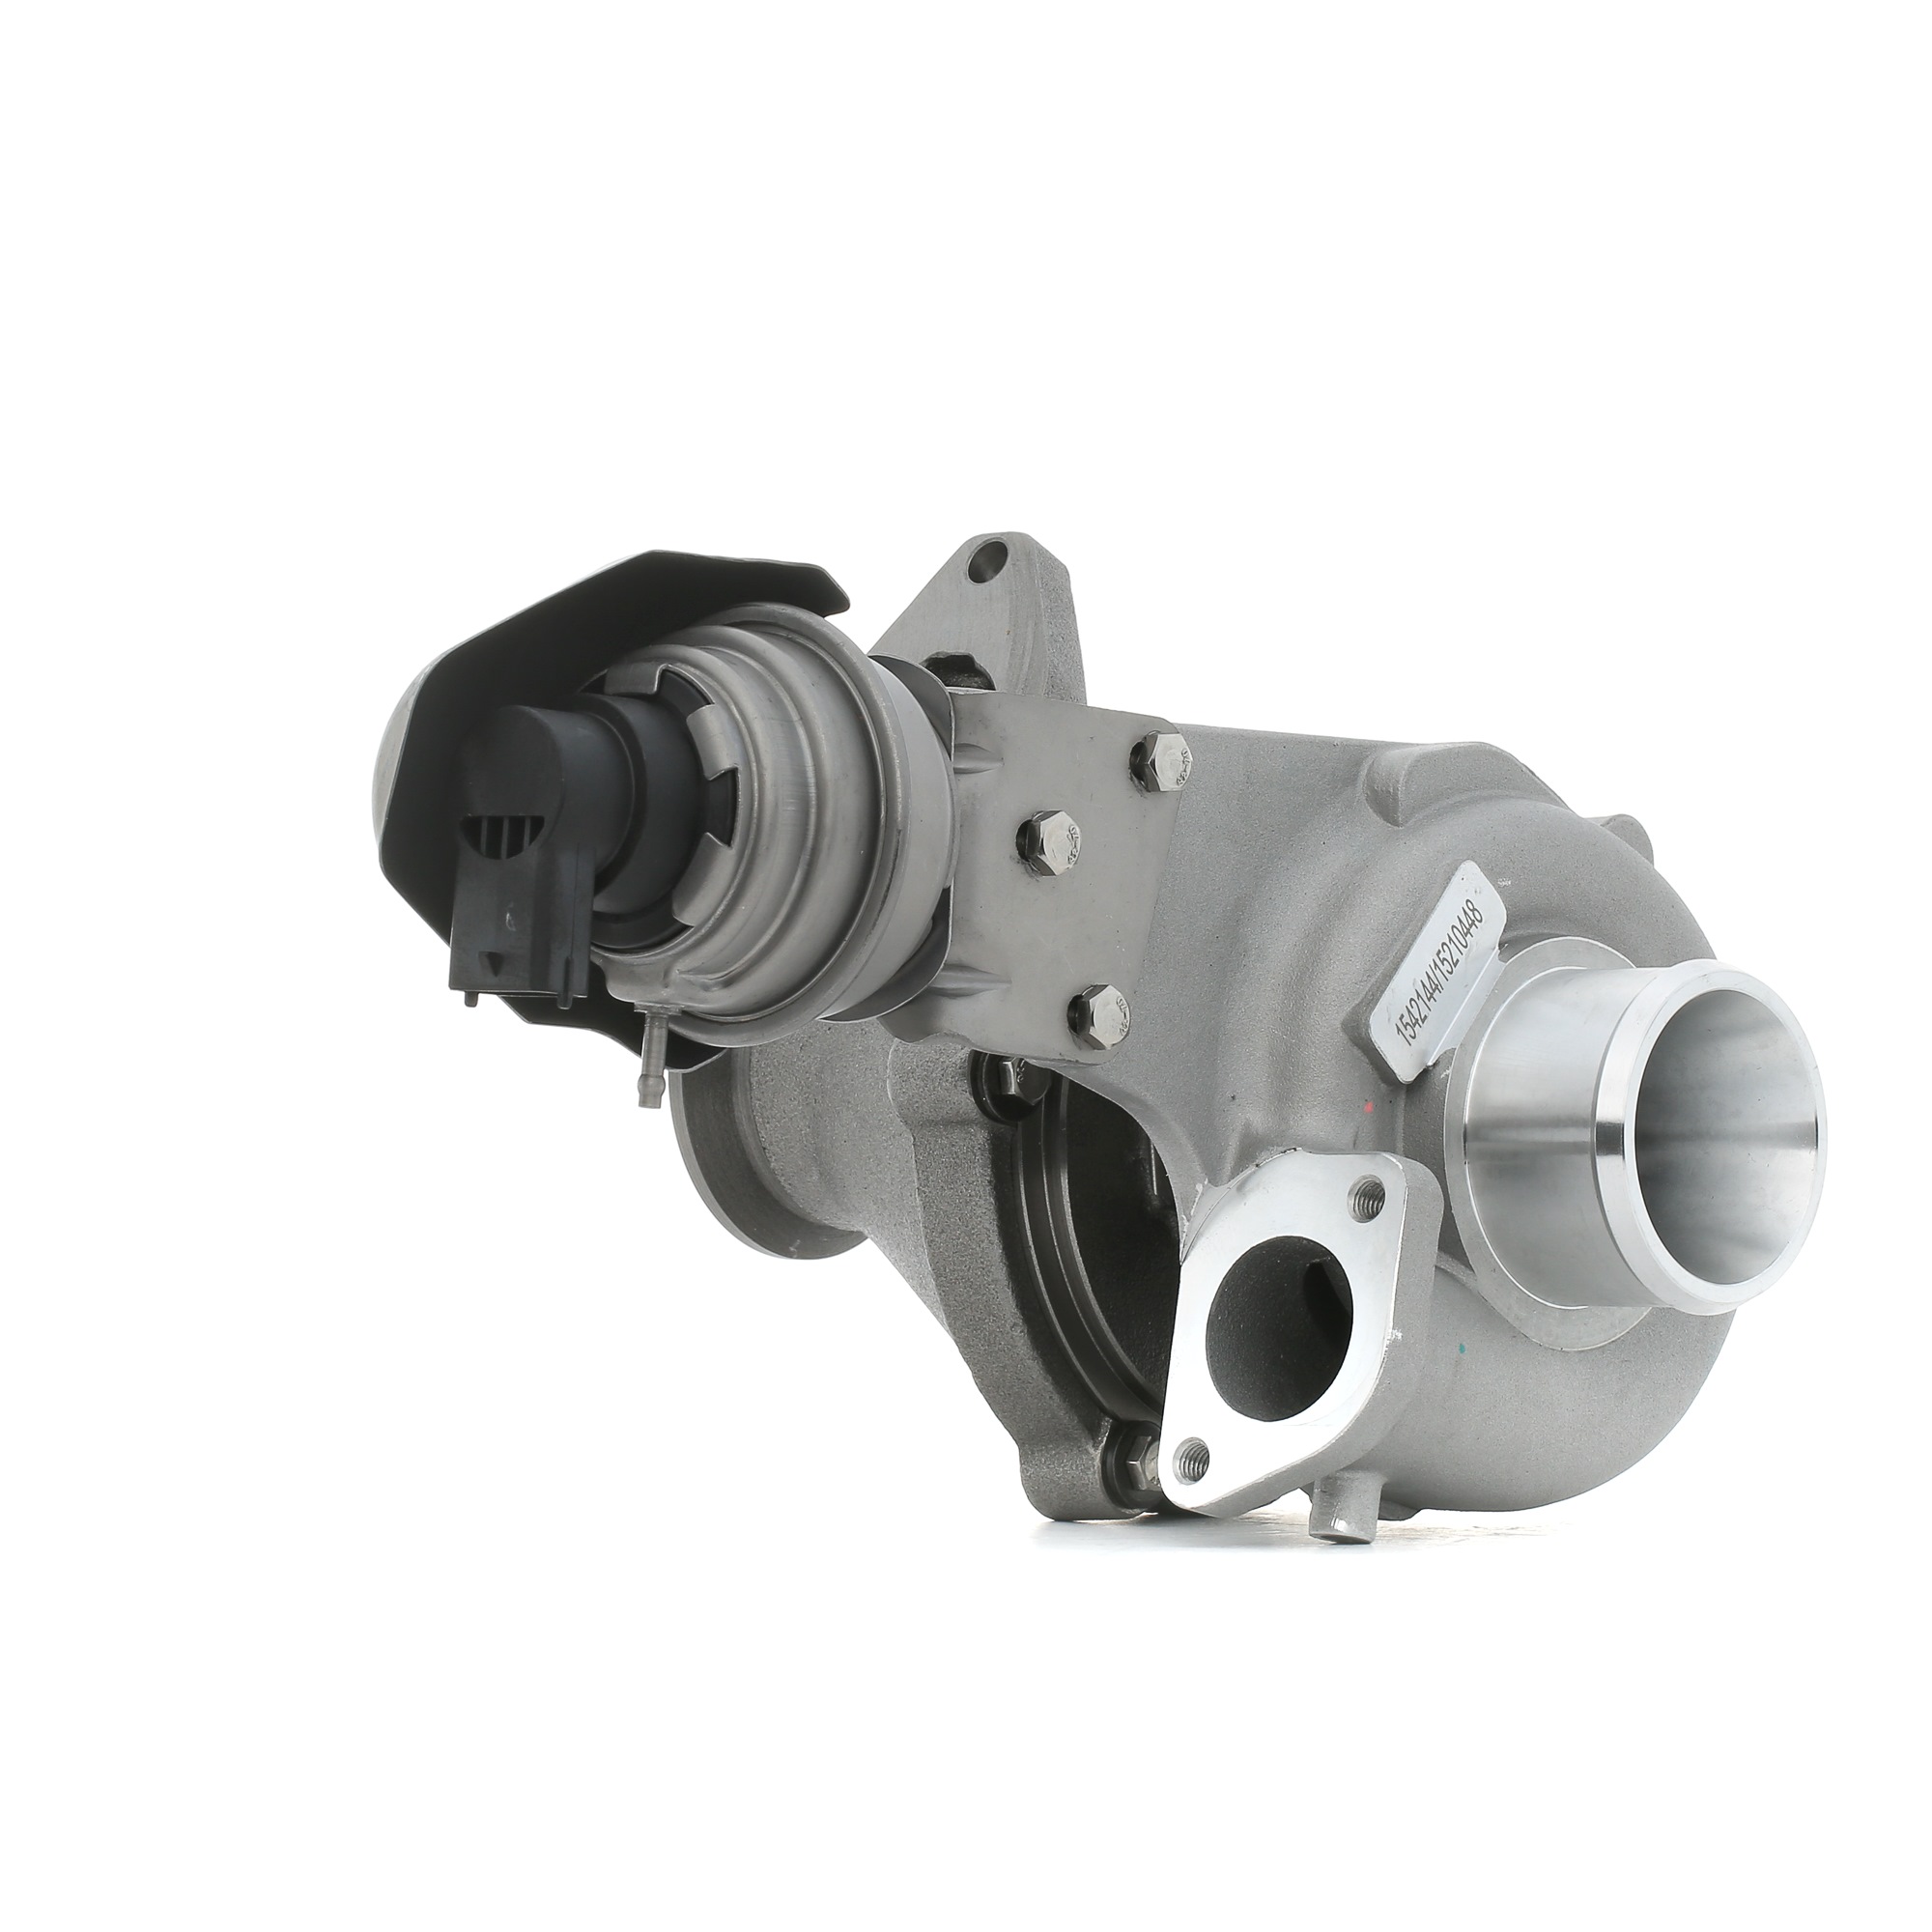 RIDEX 2234C0200 Turbocharger Exhaust Turbocharger, Pneumatic, Incl. Gasket Set, without attachment material